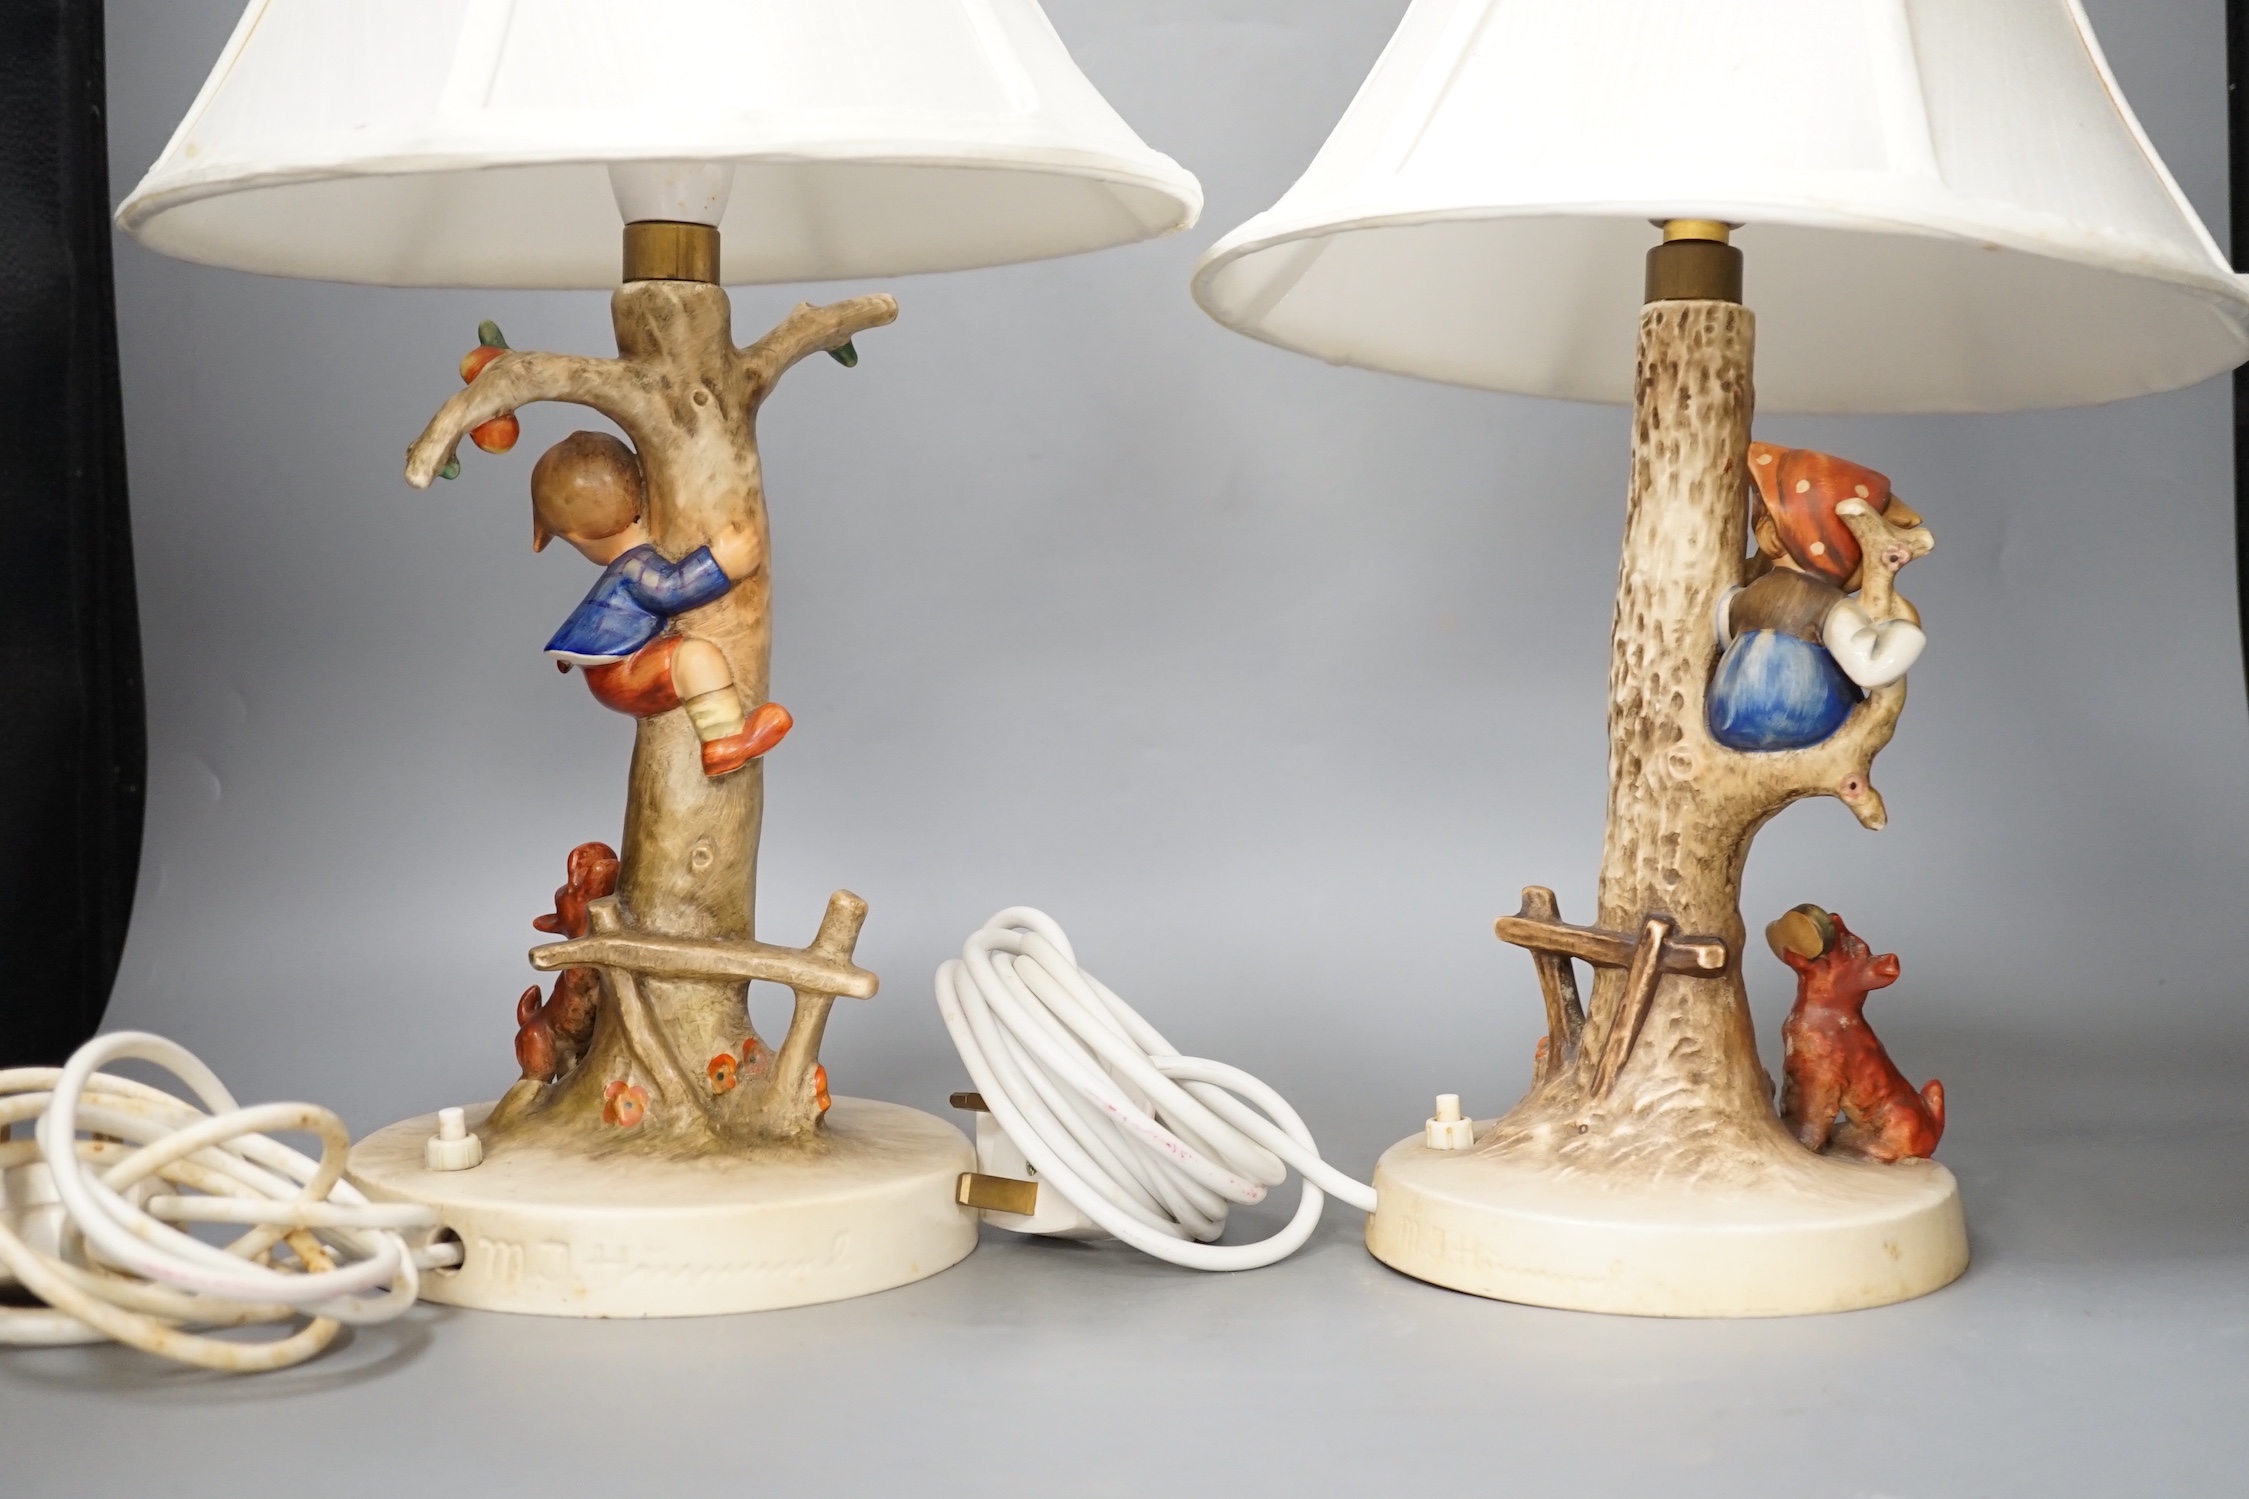 A pair of Hummel lamp bases - 43cm high including shades